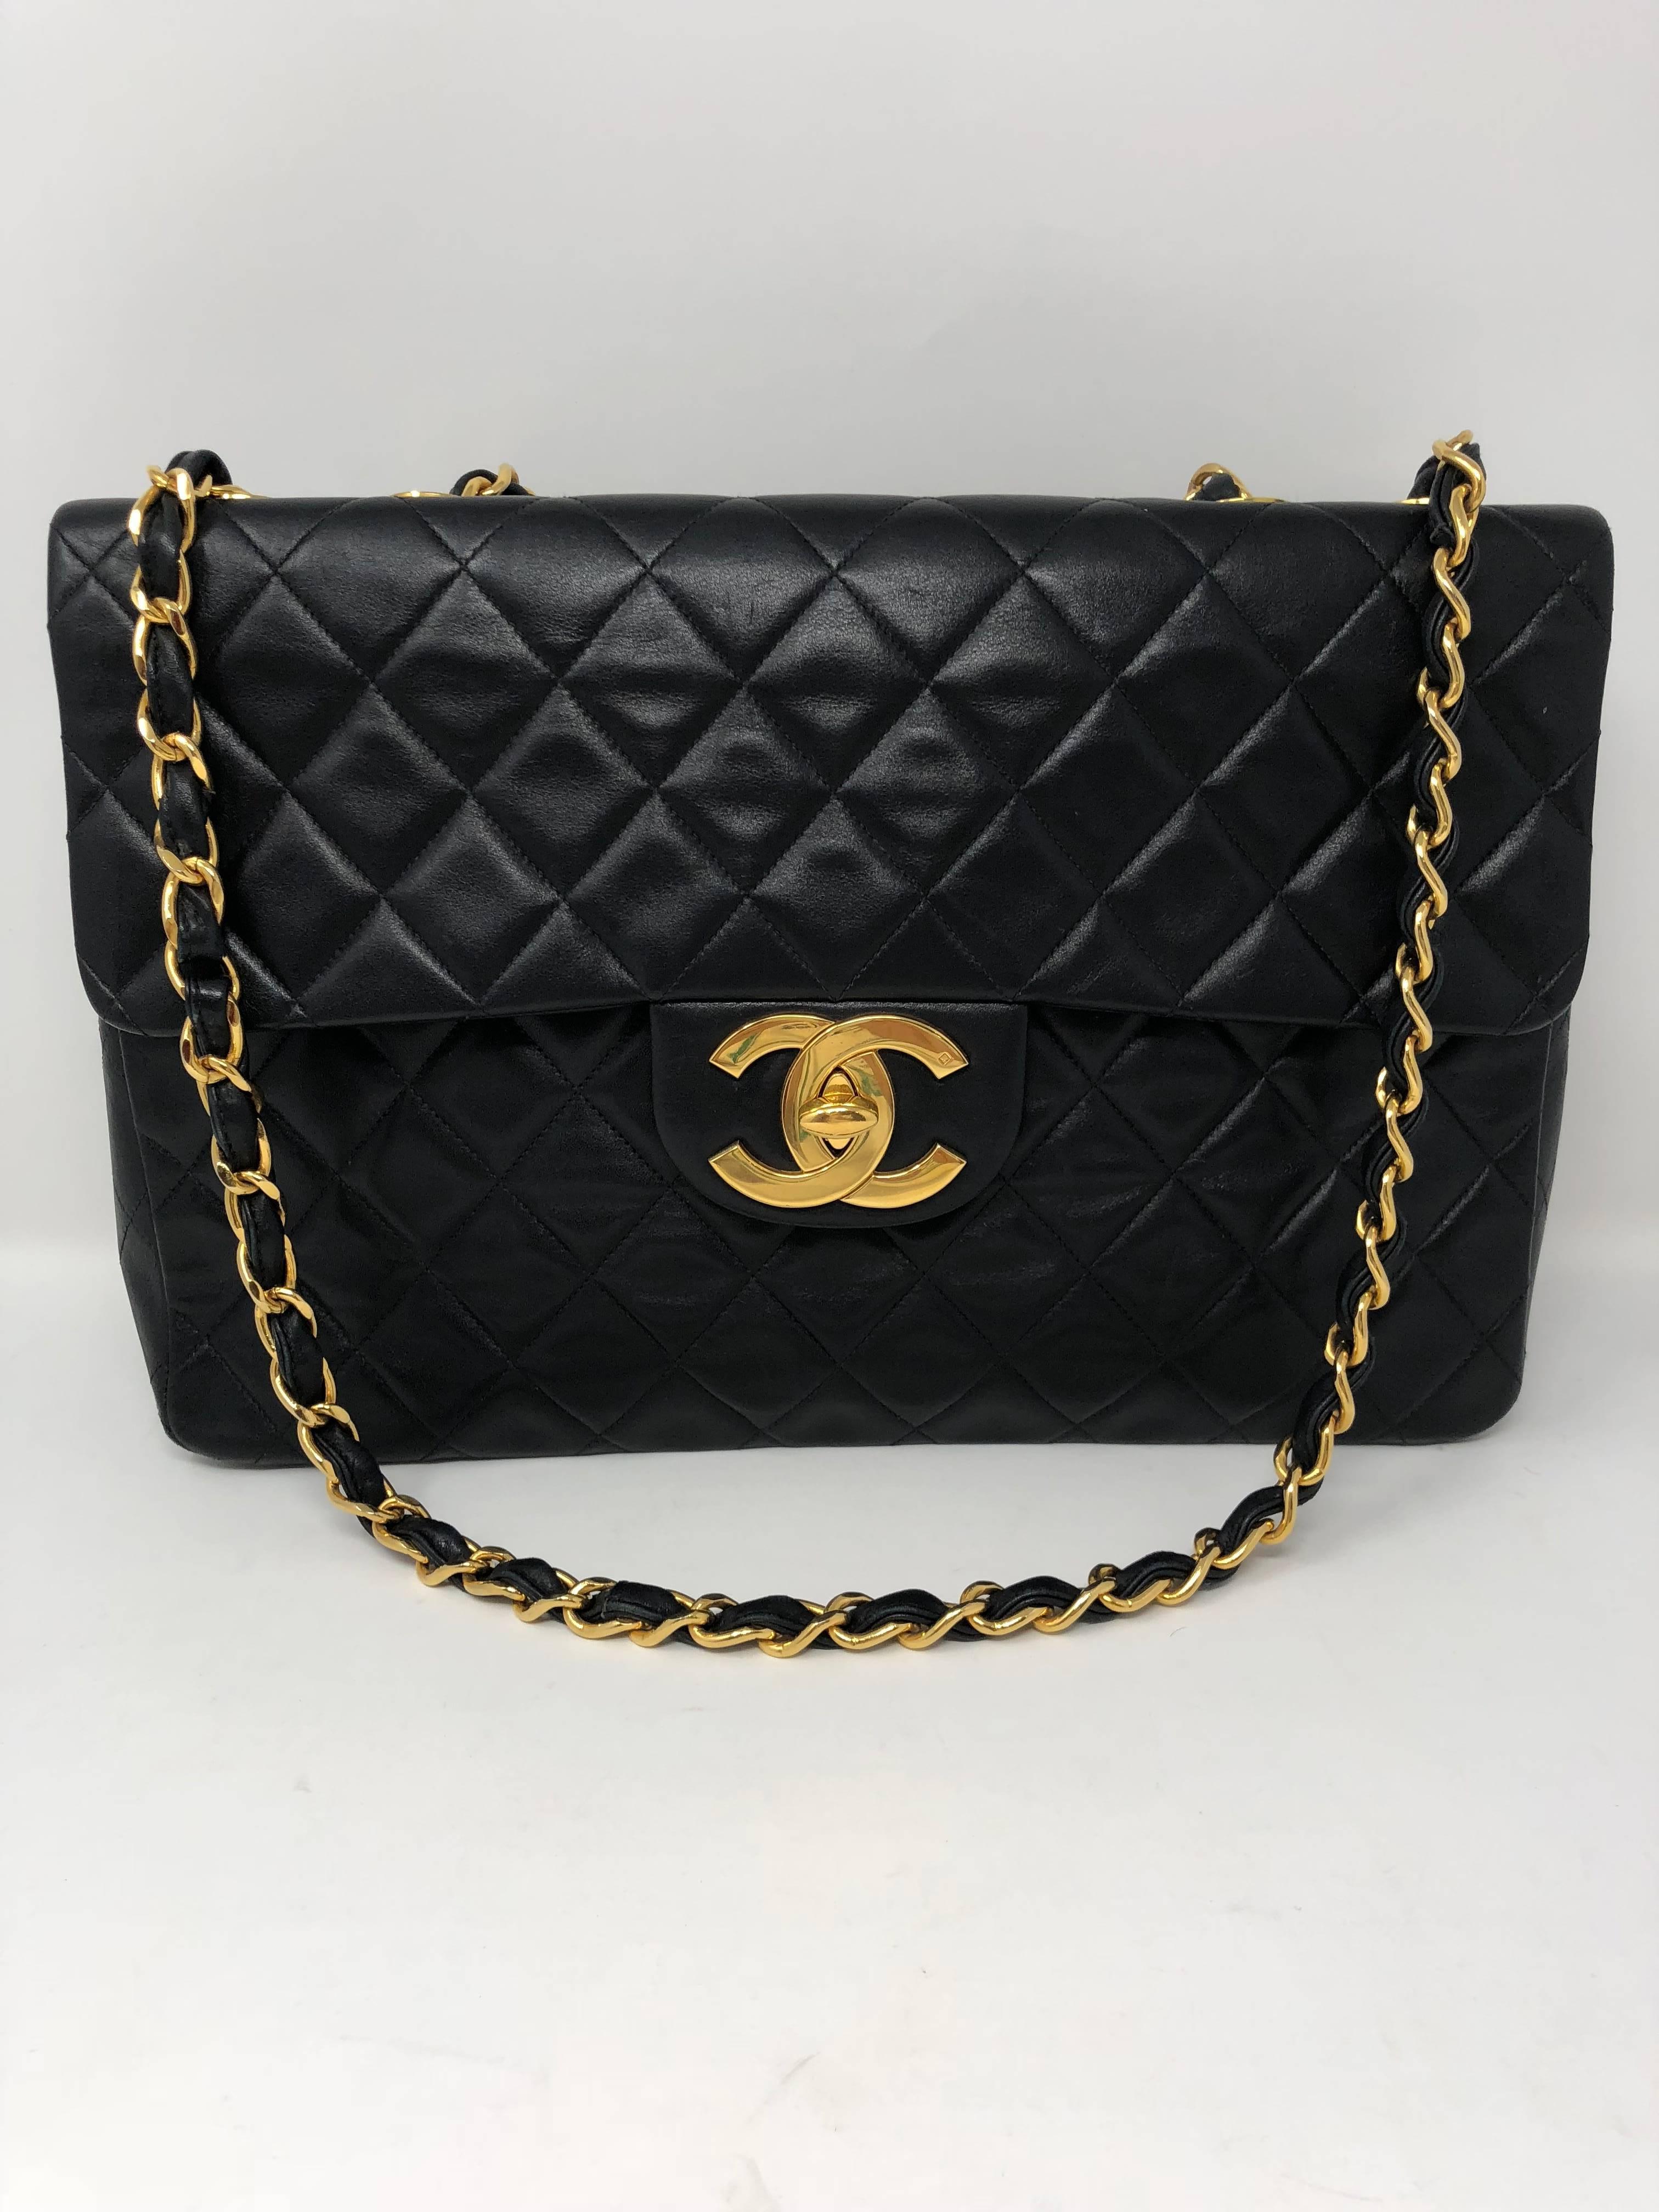 Vintage Chanel Maxi Single Flap bag in lambskin leather. Soft and buttery leather in mint condition. Over 13